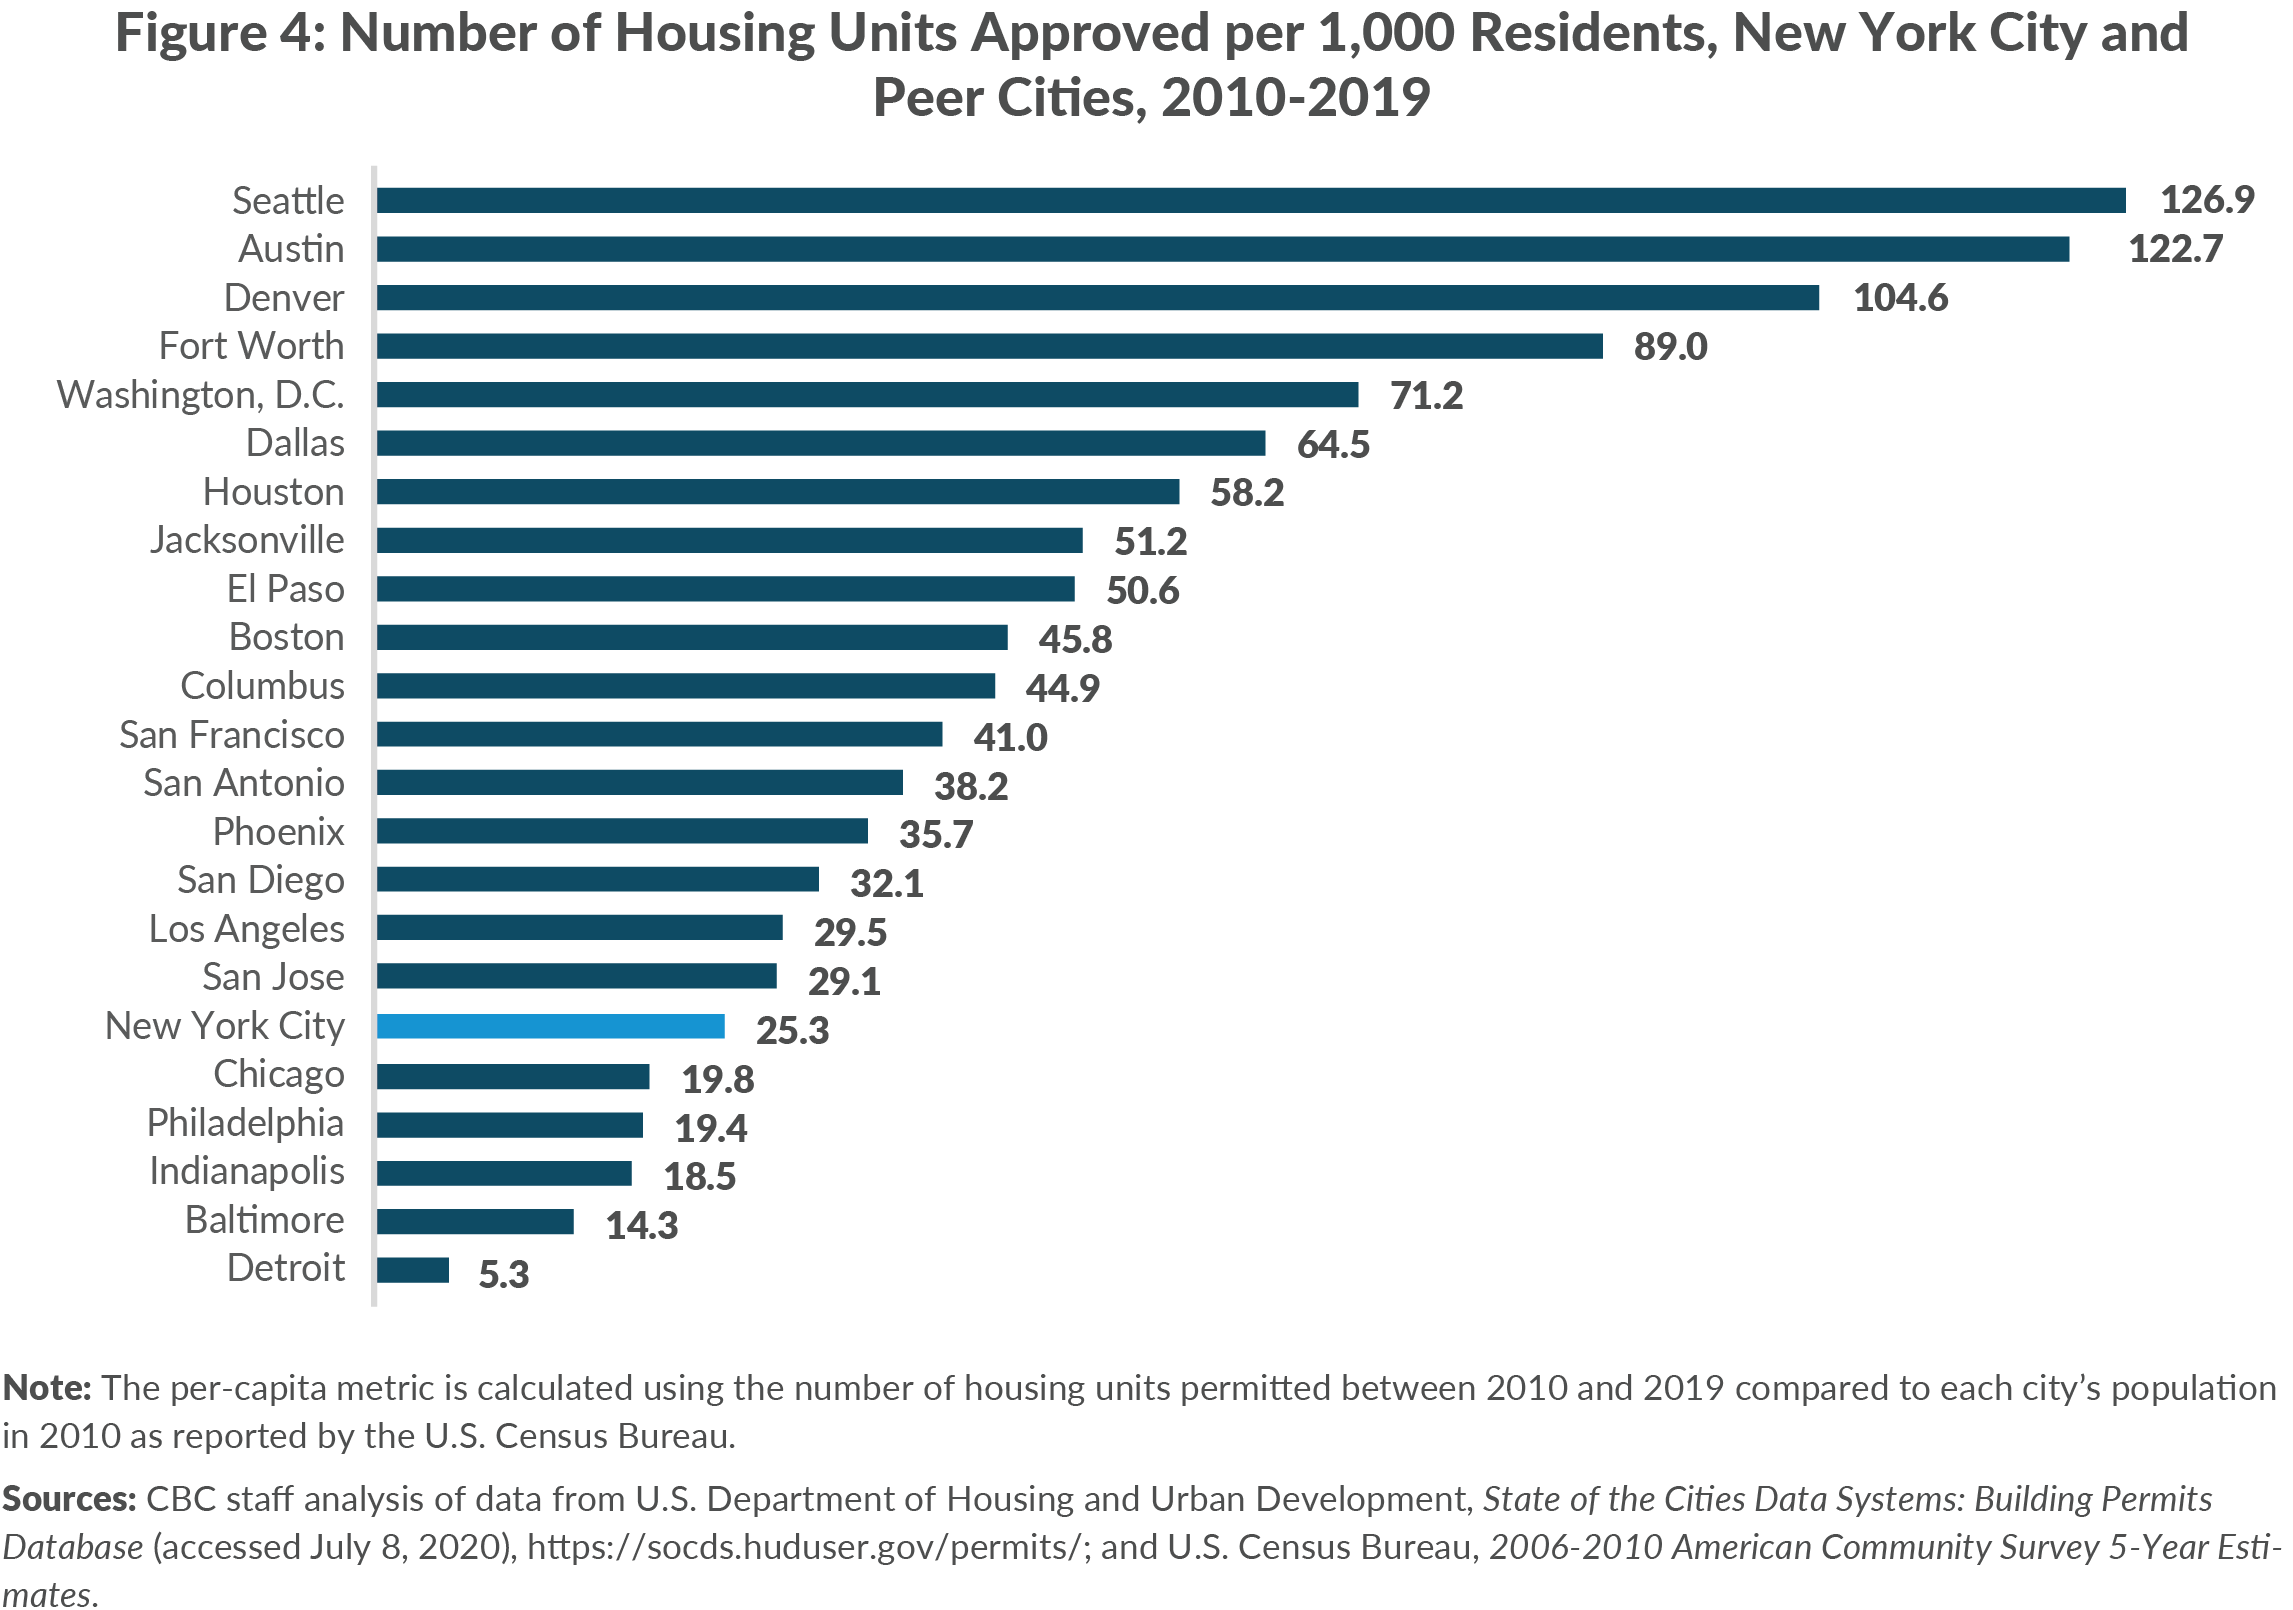 Figure 4. Number of Housing Units Approved per 1,000 Residents, New York City and Peer Cities, 2010-2019